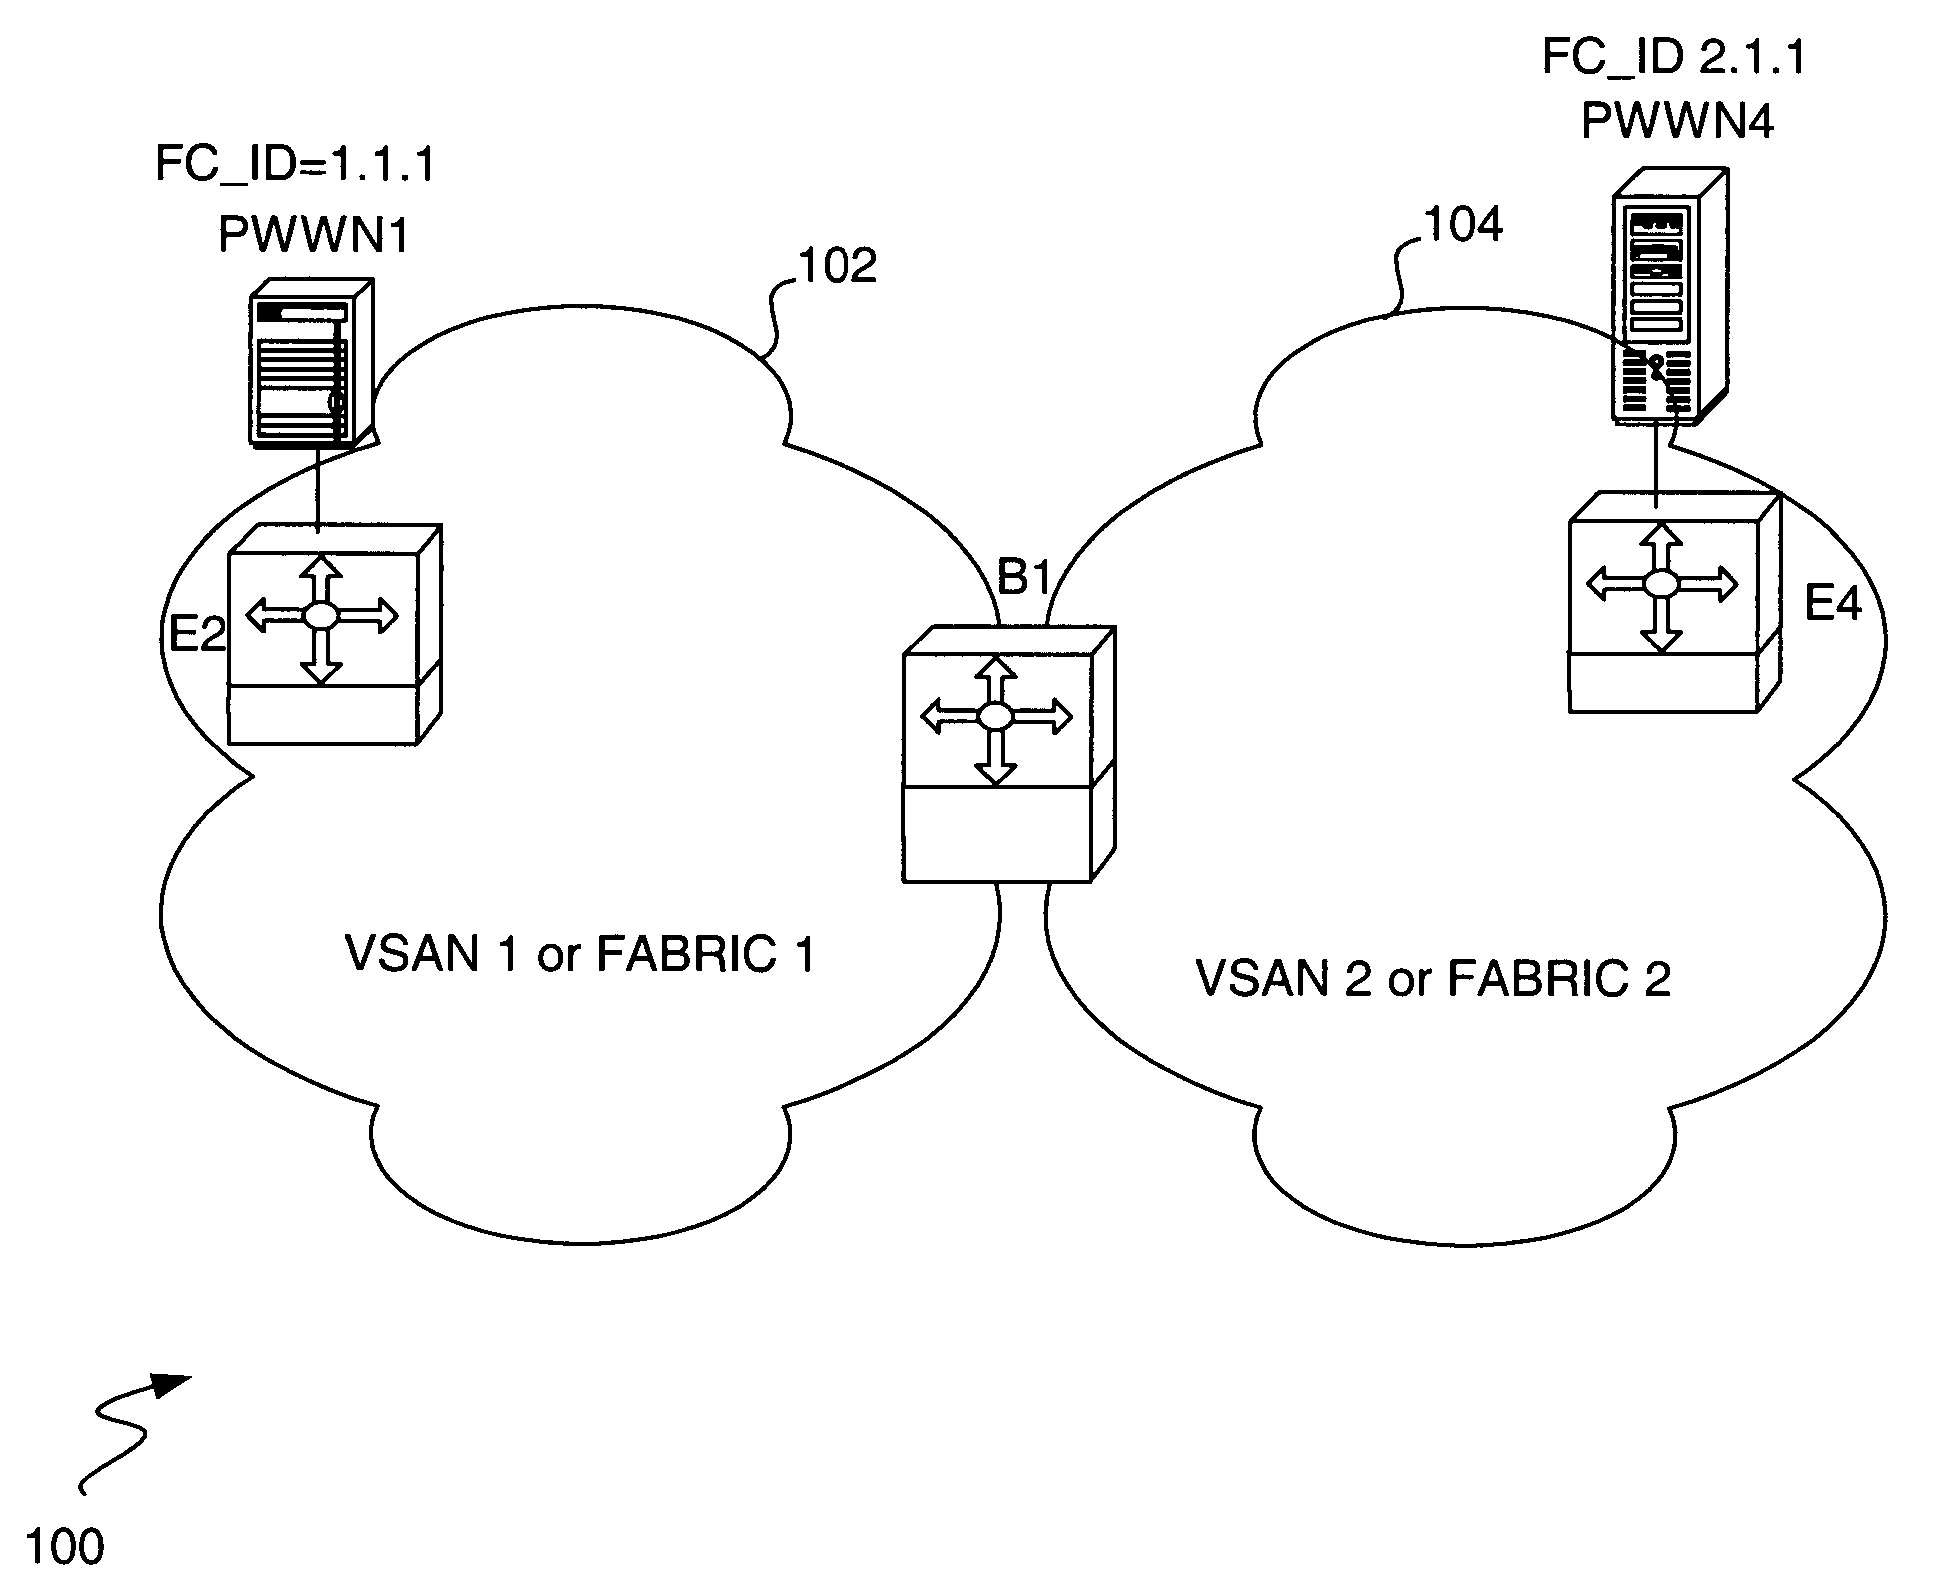 Fibre channel switch that enables end devices in different fabrics to communicate with one another while retaining their unique fibre channel domain-IDs